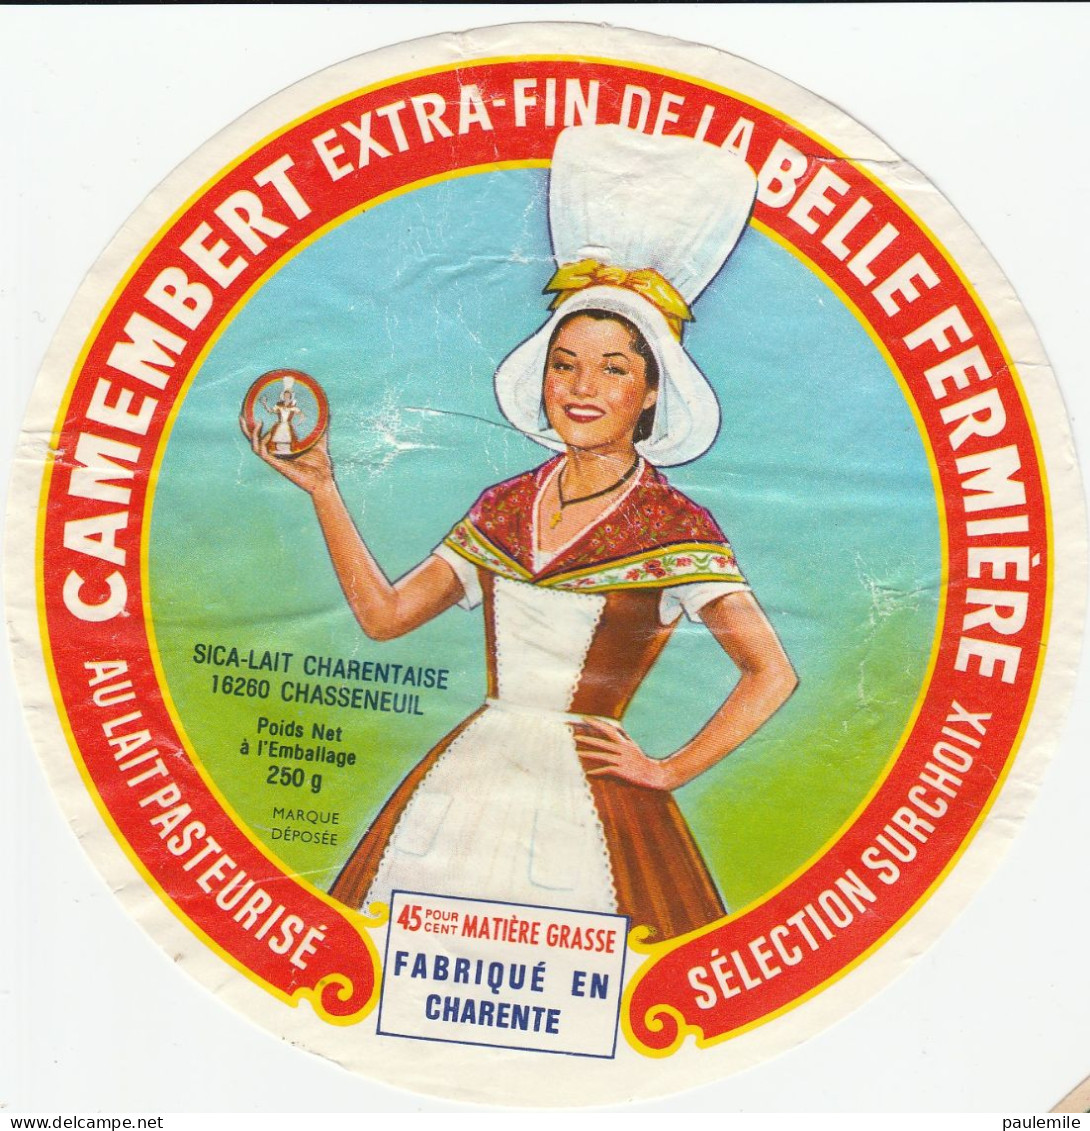 1 ETIQUETTE  CAMEMBERT DECOLLEE  CHARANTE CHASSENEUIL   BELLE FERMIERE - Fromage